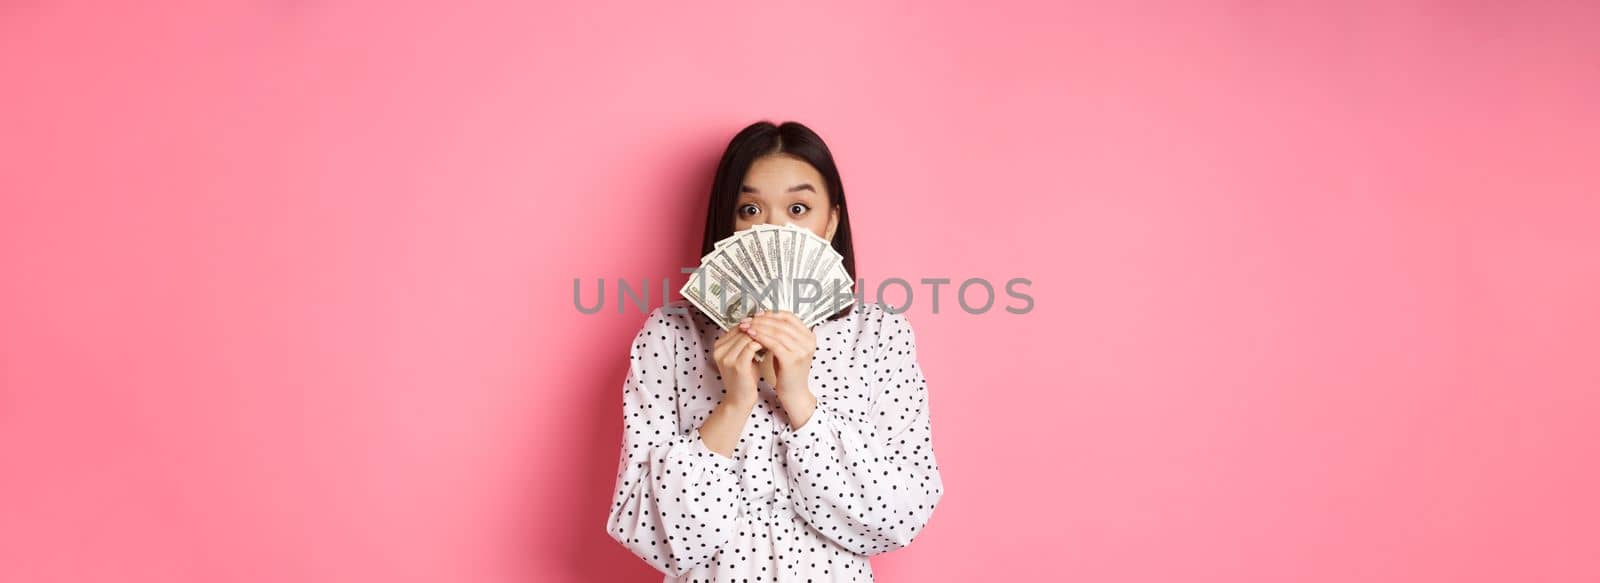 Shopping concept. Cute asian woman hiding face behind money dollars, peeking at camera, standing over pink background.